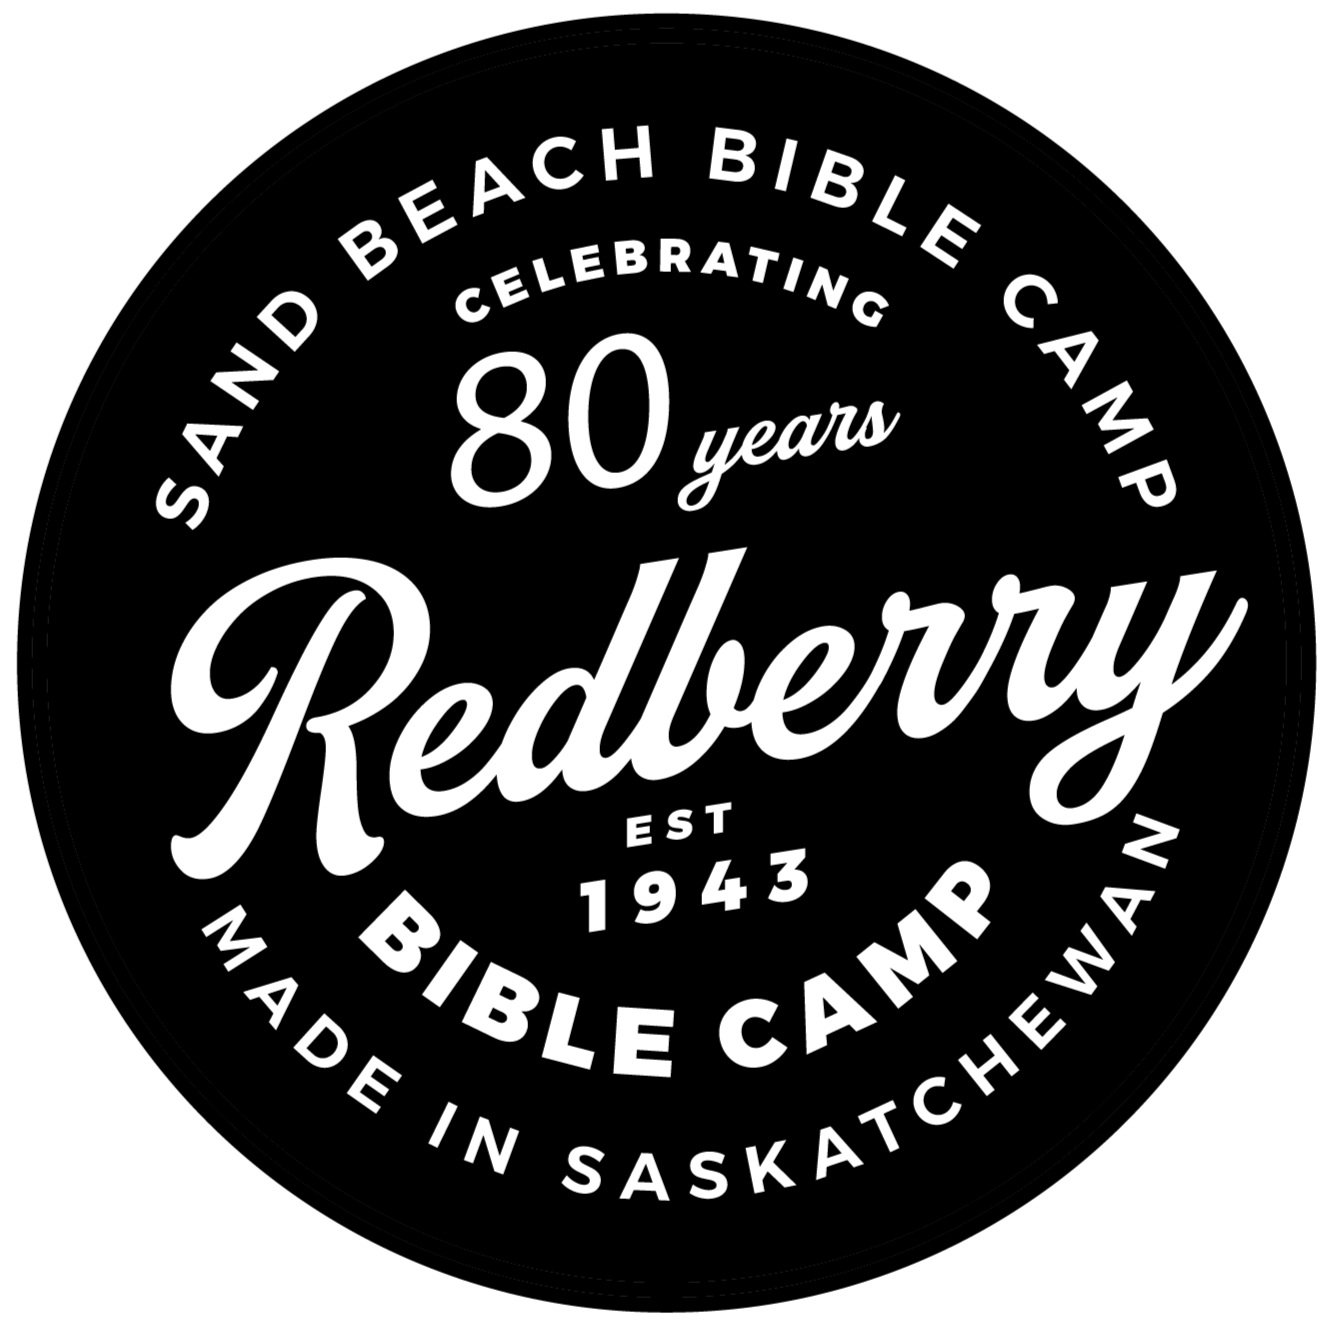 Redberry Bible Camp